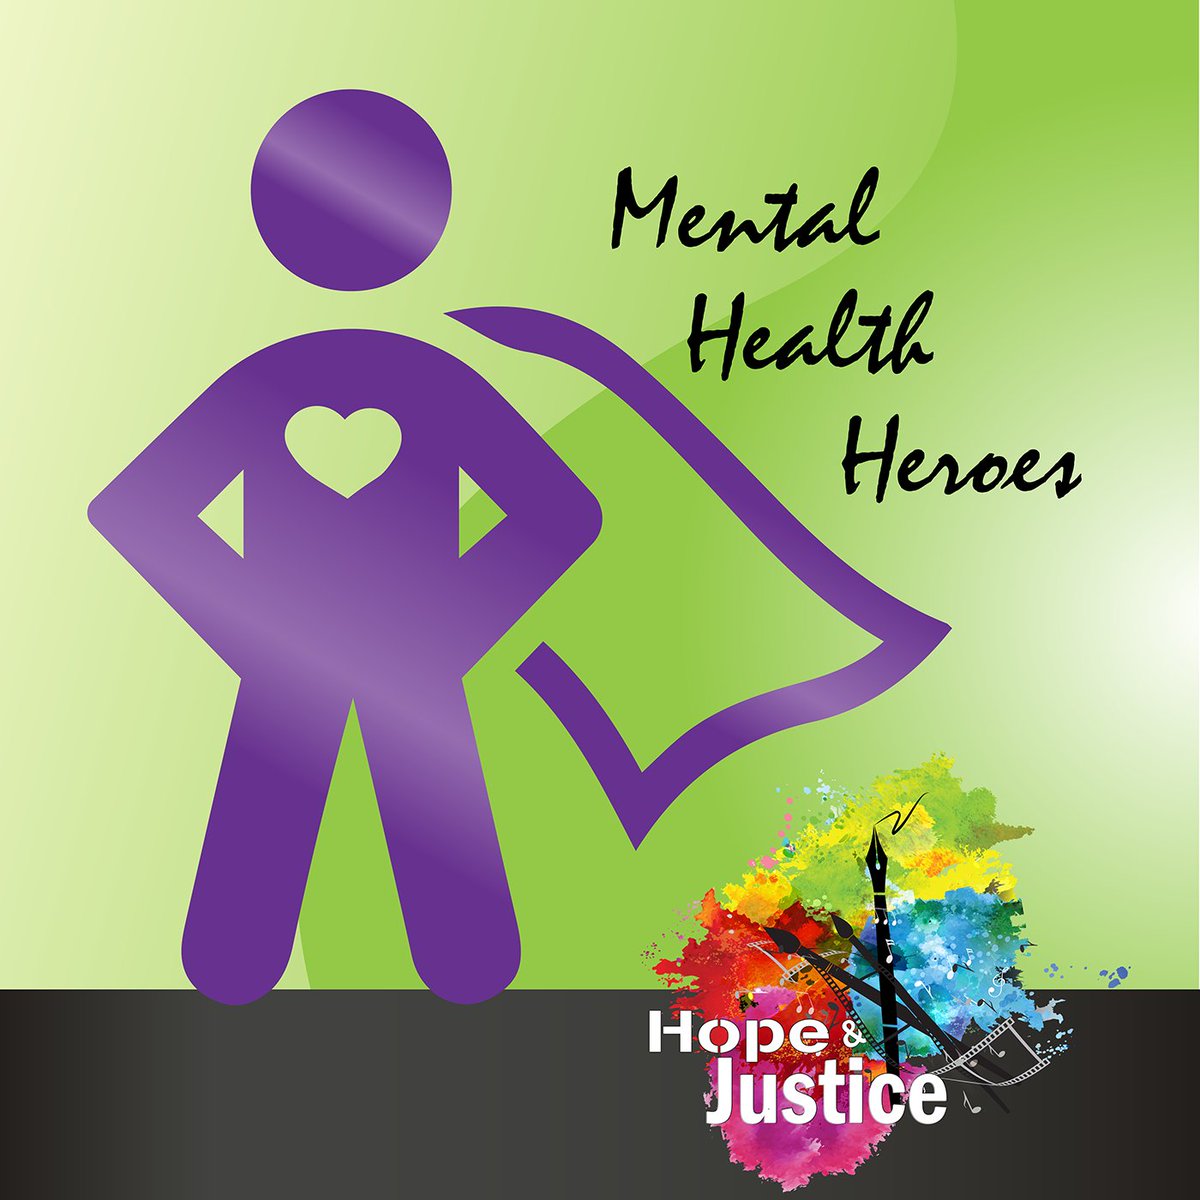 Announcing @DirectChangeCA Nov. Hope & Justice prompt: “Mental Health Heroes.” 

CA youth ages 12-25, submit by 11/30 for a chance to win up to $300 in gift cards! 

Learn more: hopeandjustice.directingchange.org
#CalHope #DirectingChange #artcontest #gratitude #mentalhealth #takeaction4MH